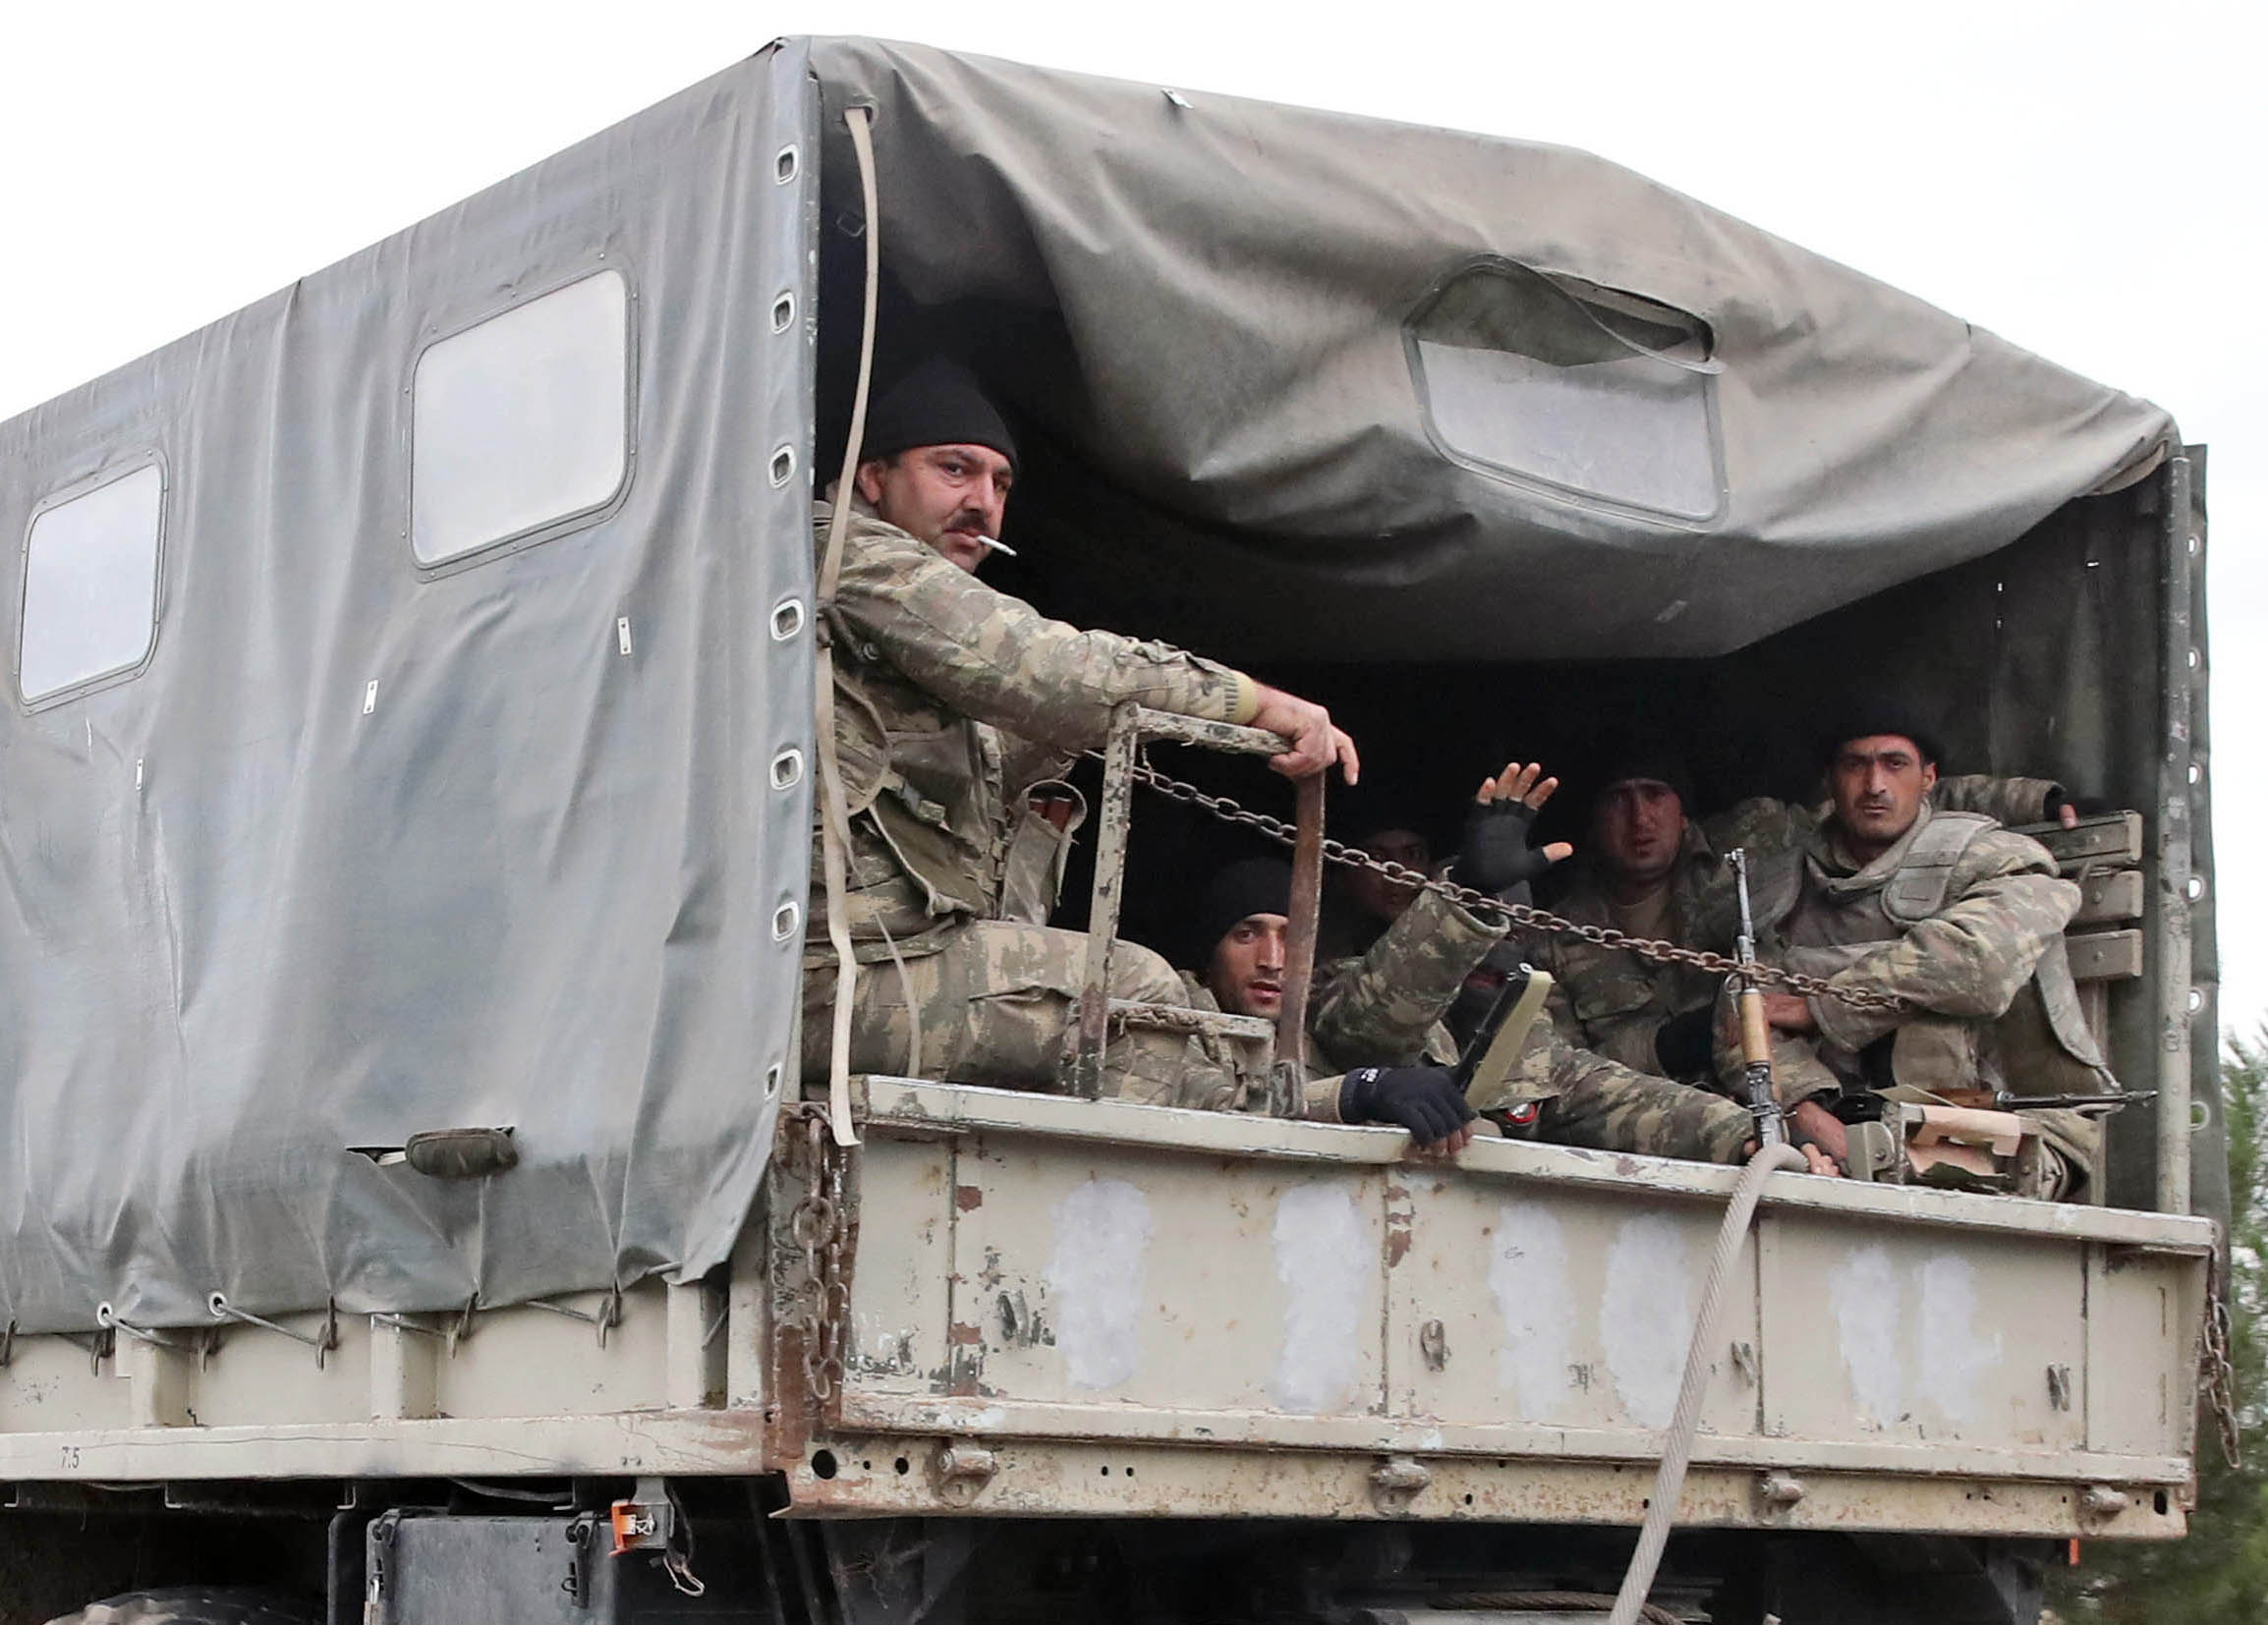 BARDA, AZERBAIJAN - OCTOBER 5, 2020: Azerbaijani servicemen are pictured in a personnel carrier. (Valery Sharifulin—TASS/Getty Images)